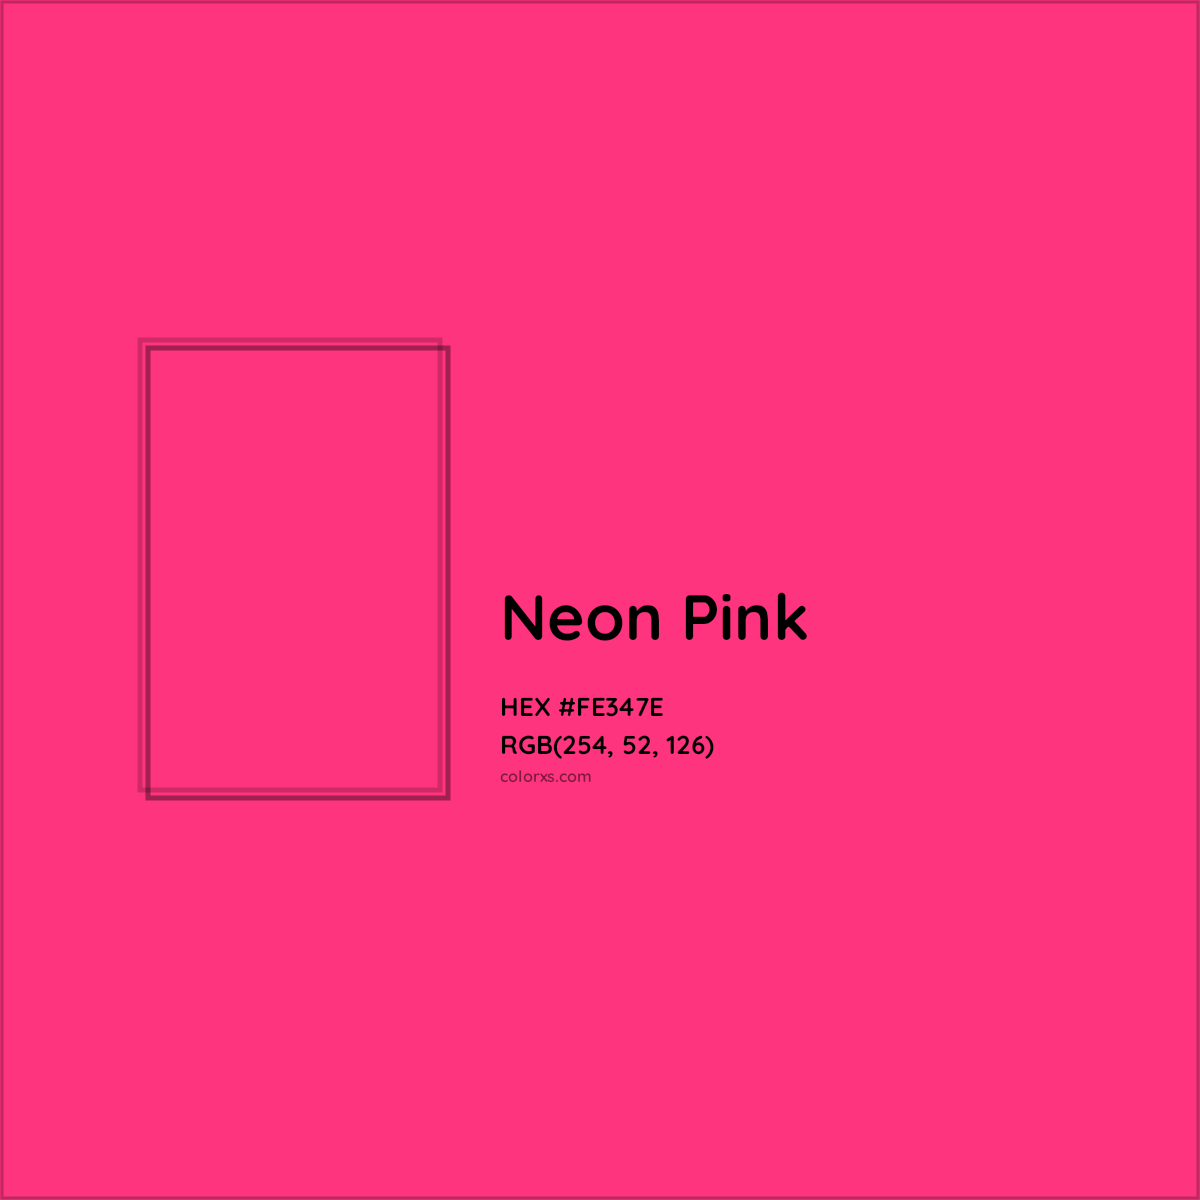 About Neon Pink - Color codes, similar colors and paints 